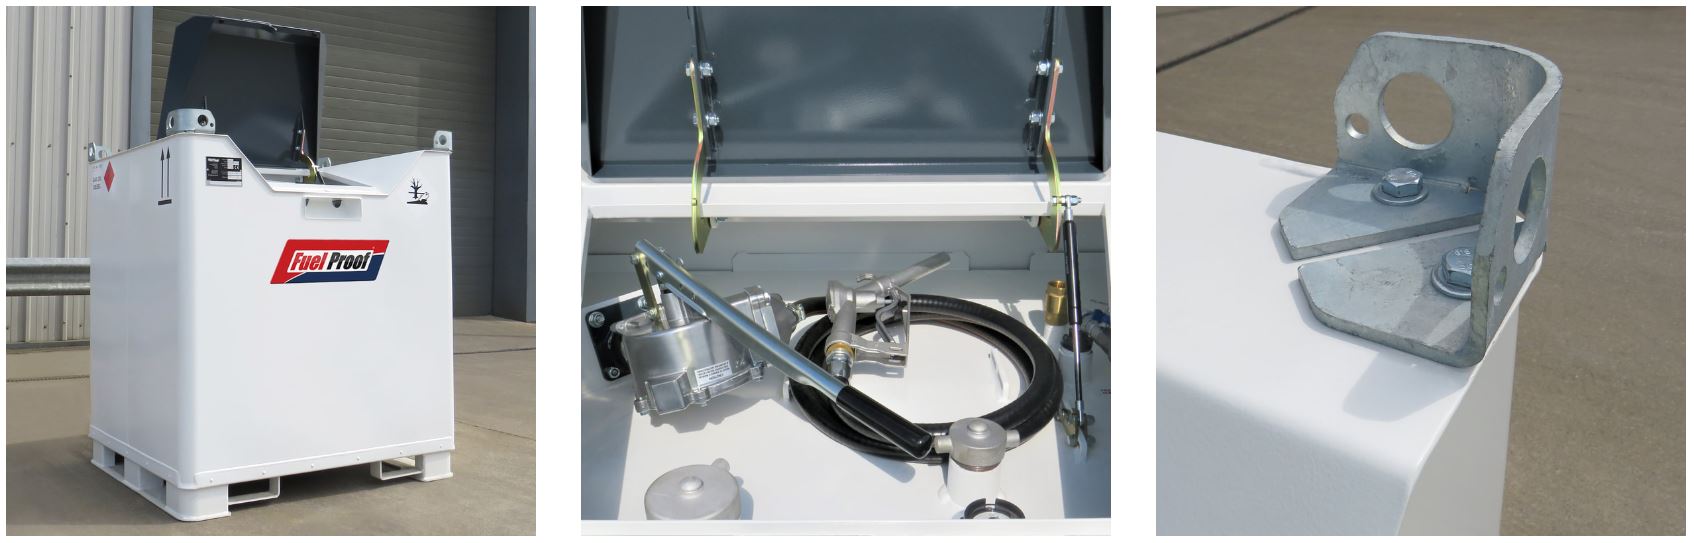 White Fuel Proof US 250 Gallon Fuelcube fuel tank, fuel dispensing kit and galvanised lifting eyes